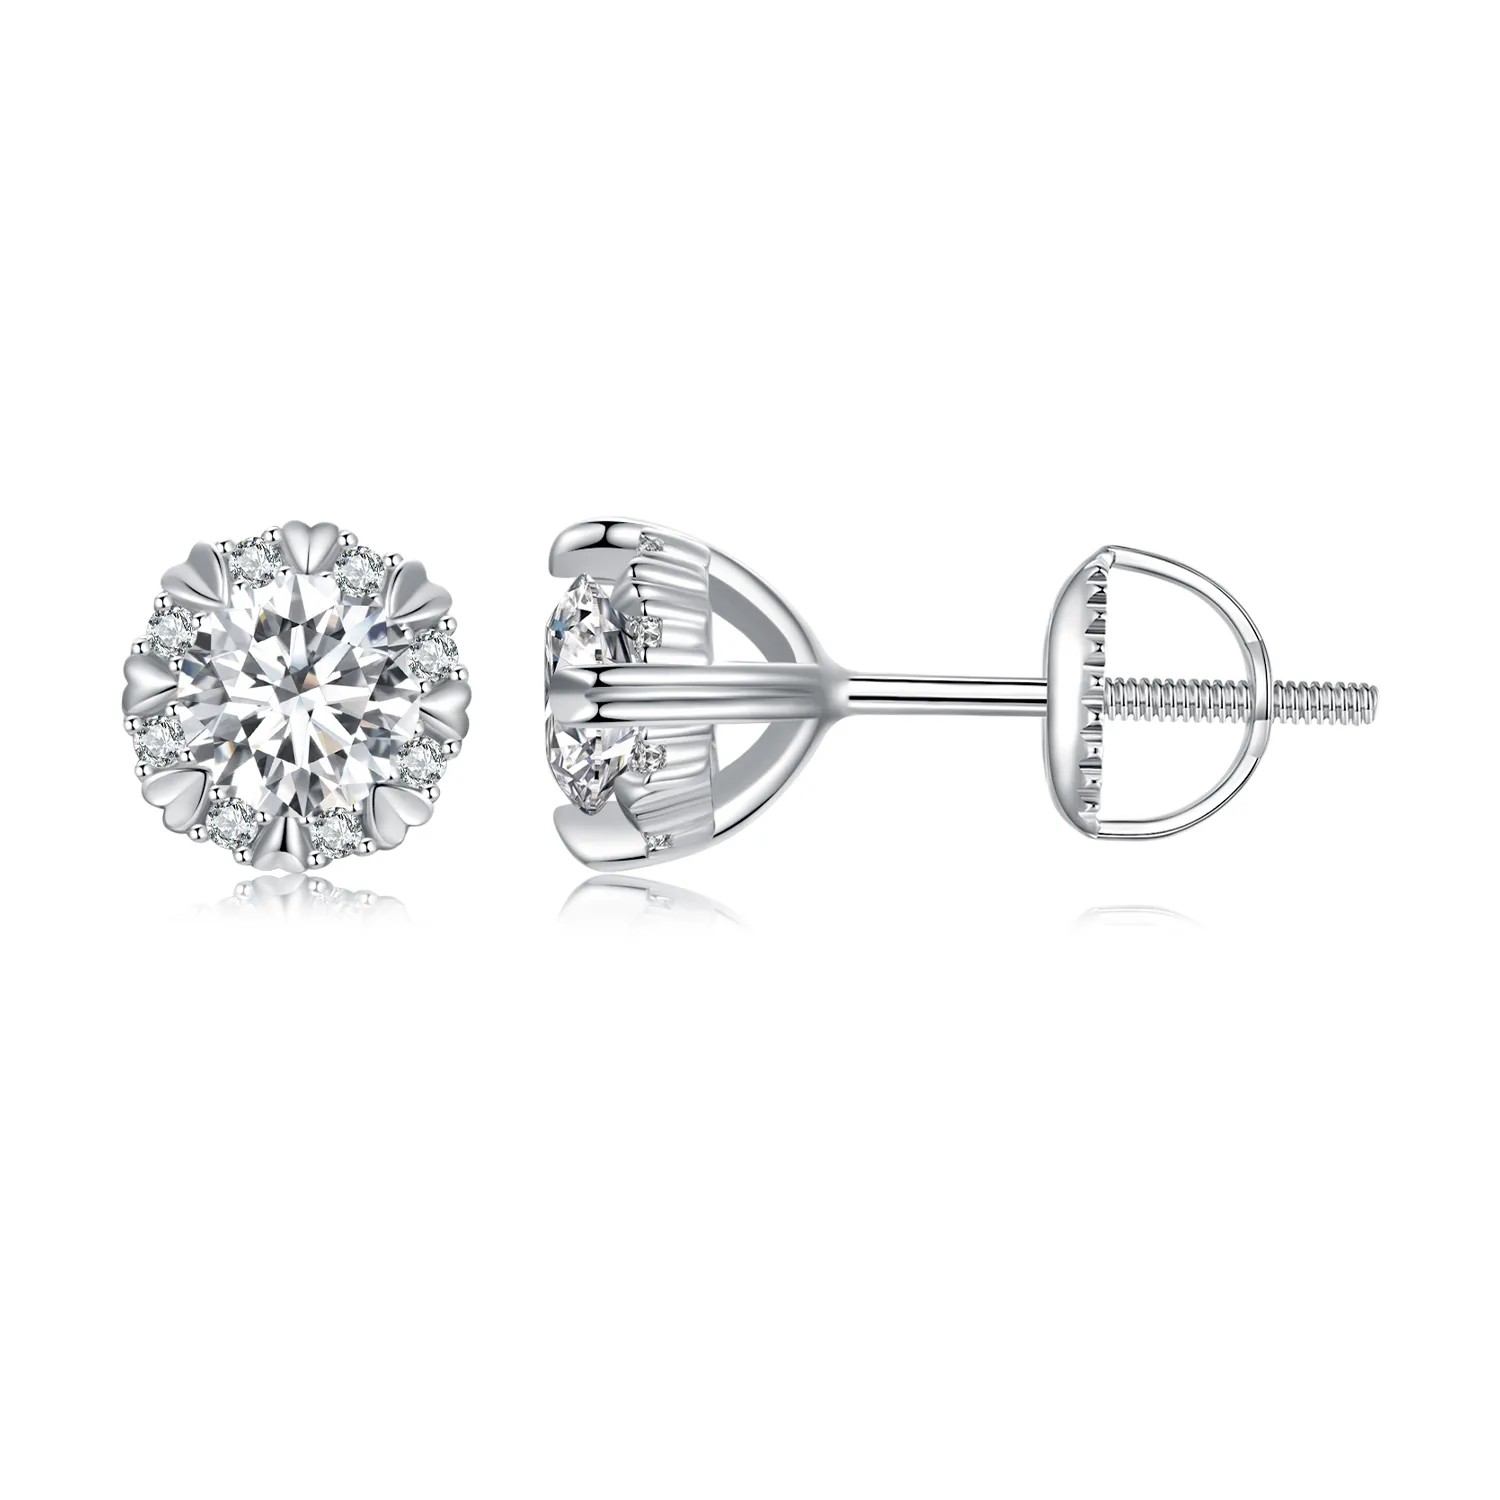 pandora style exquisite moissanite studs earrings mse017